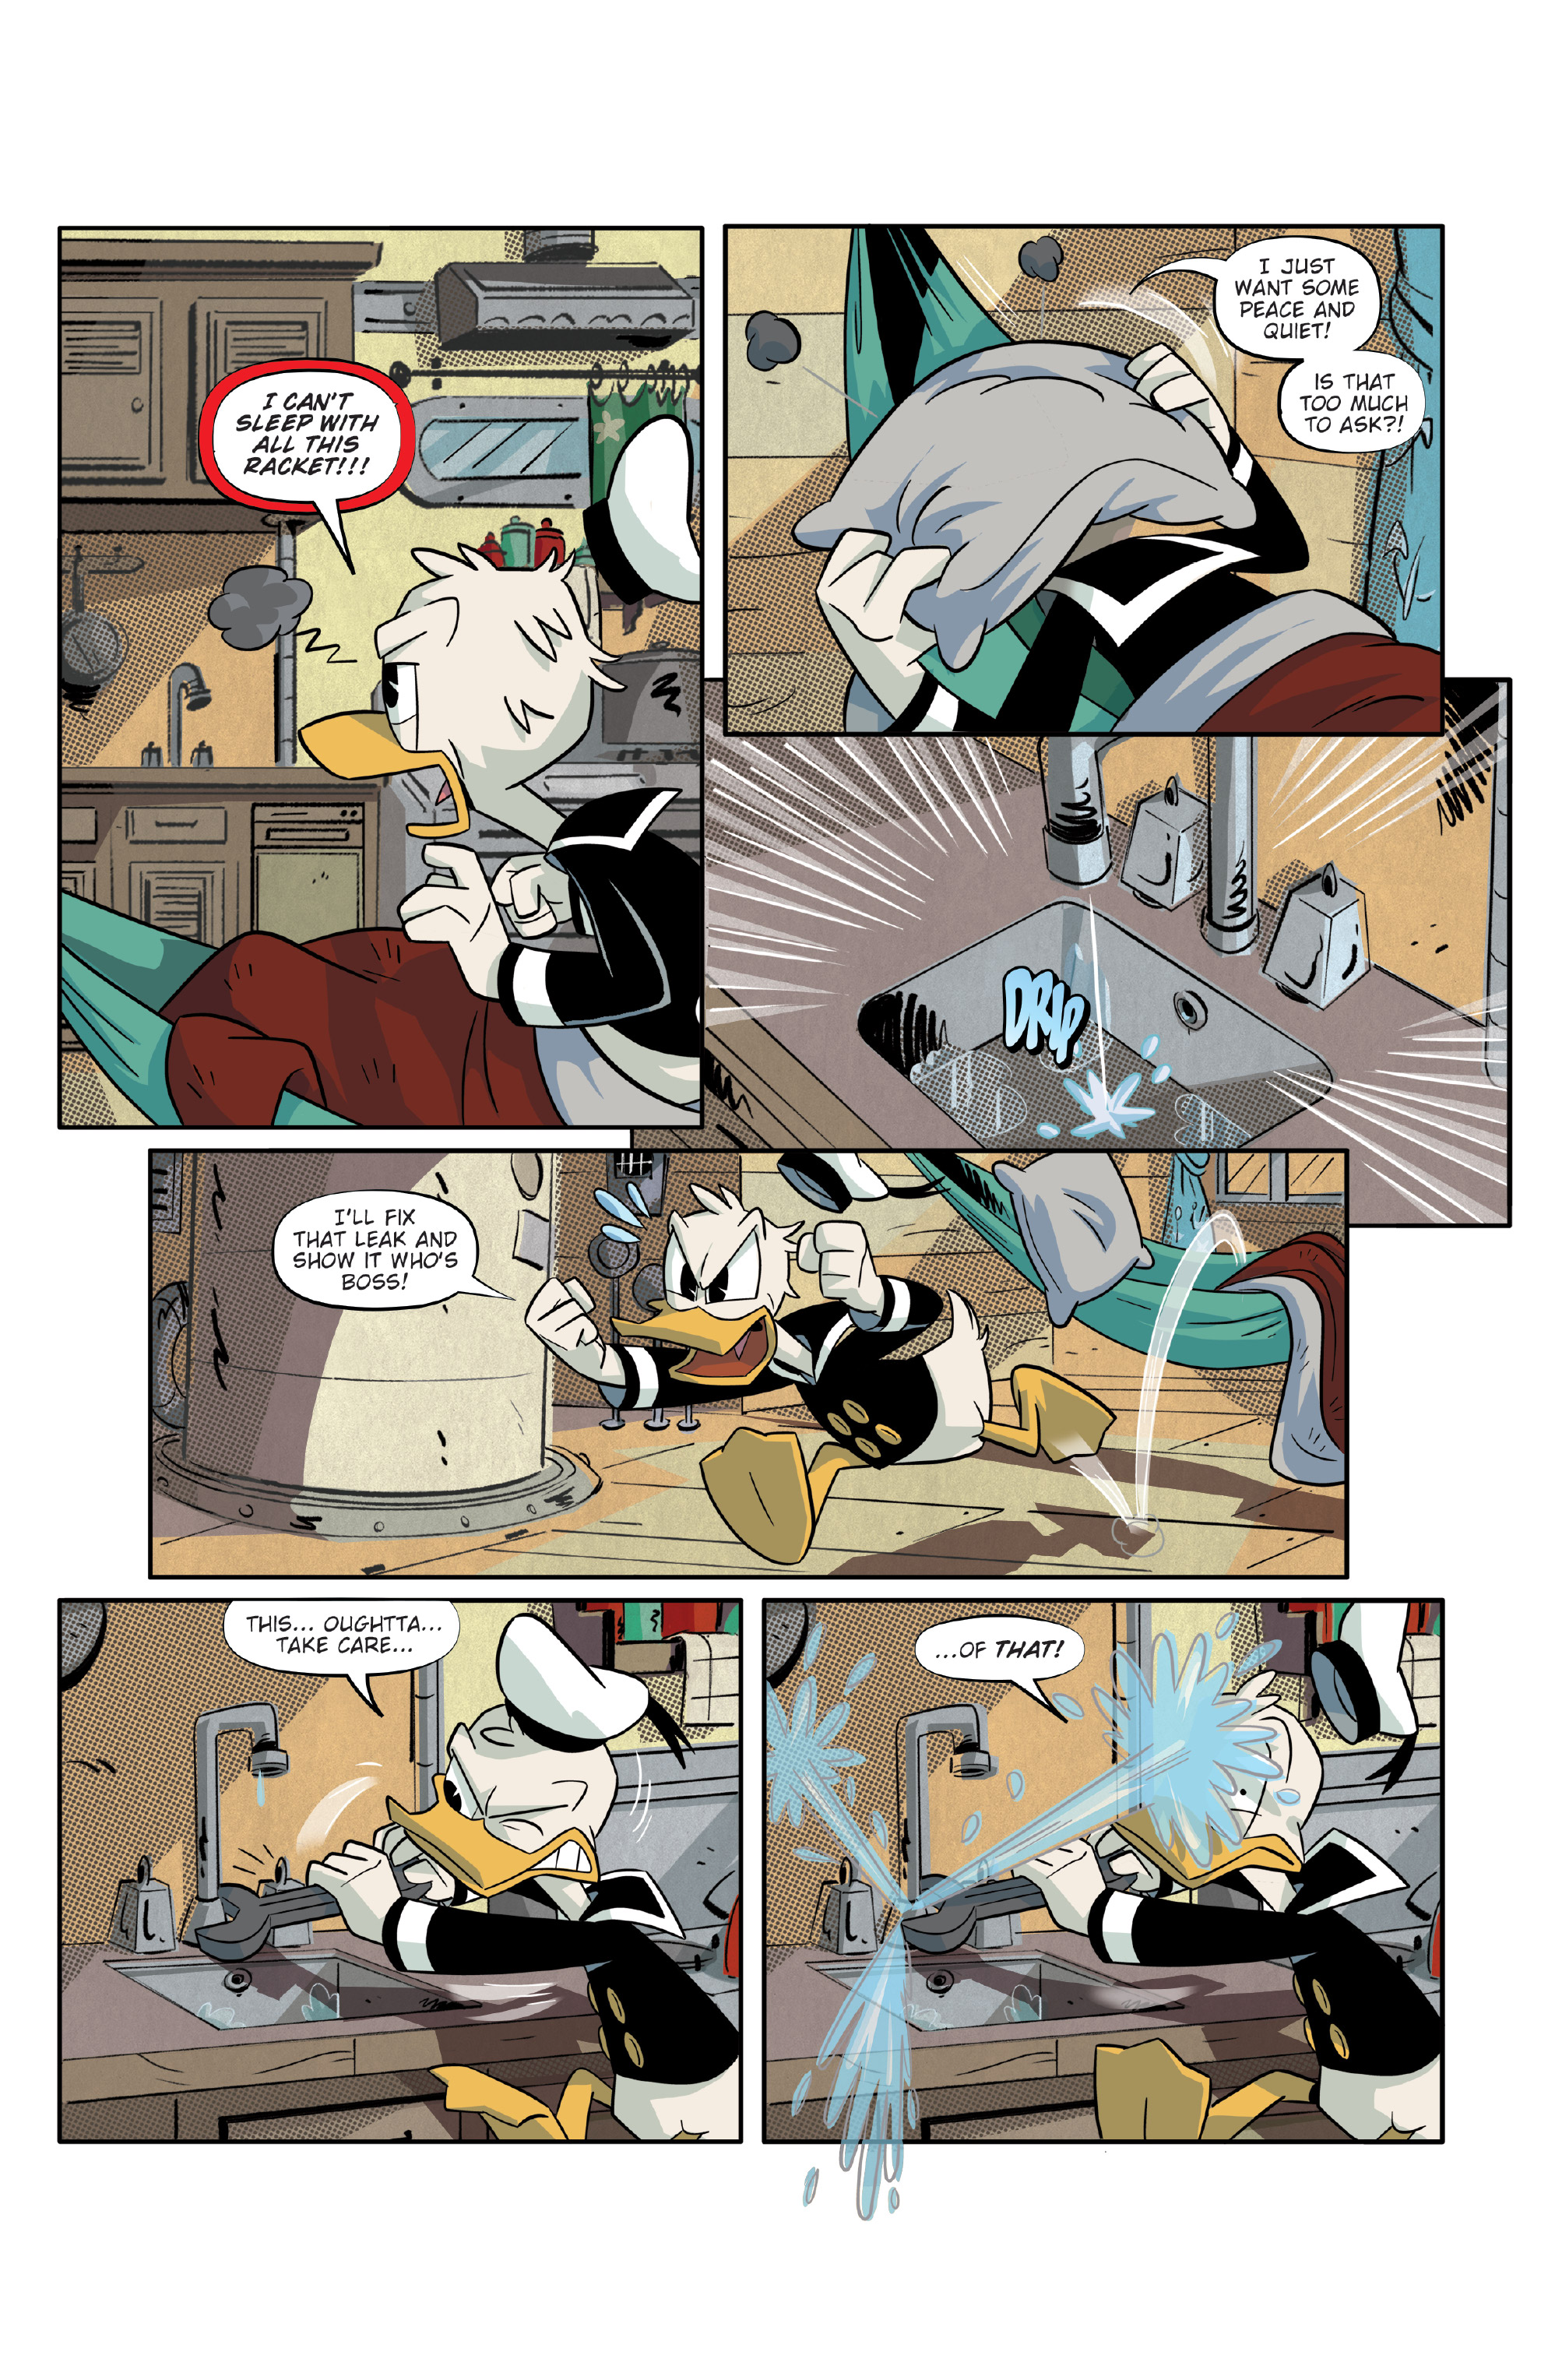 DuckTales: Silence & Science (2019-): Chapter 1 - Page 4